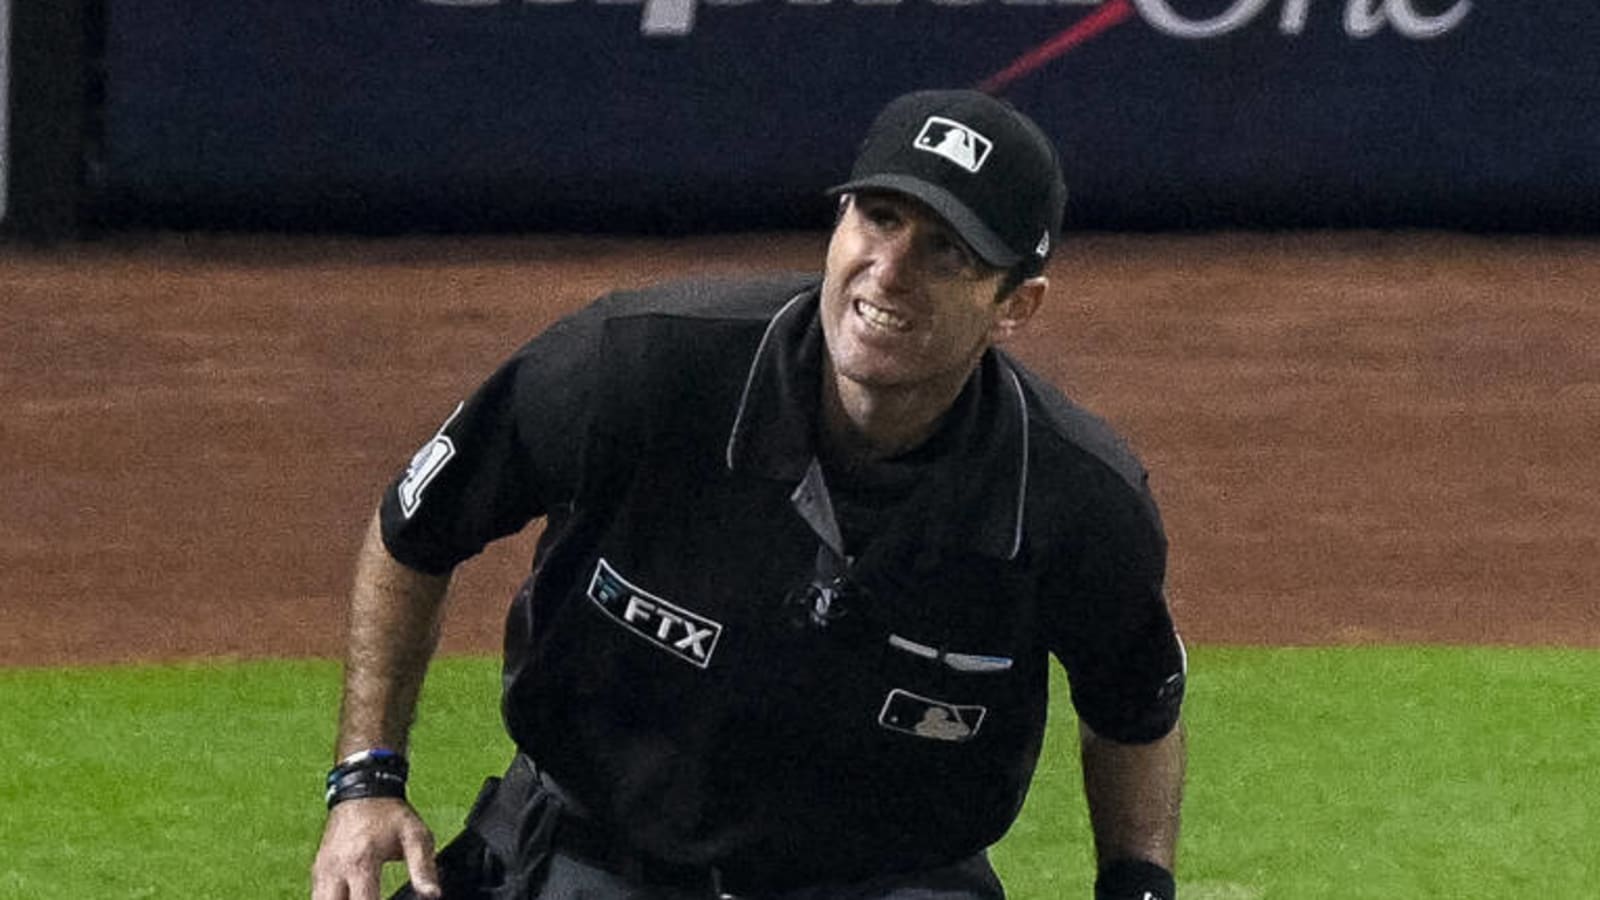 Umpire Hoberg called perfect game in Game 2 of World Series